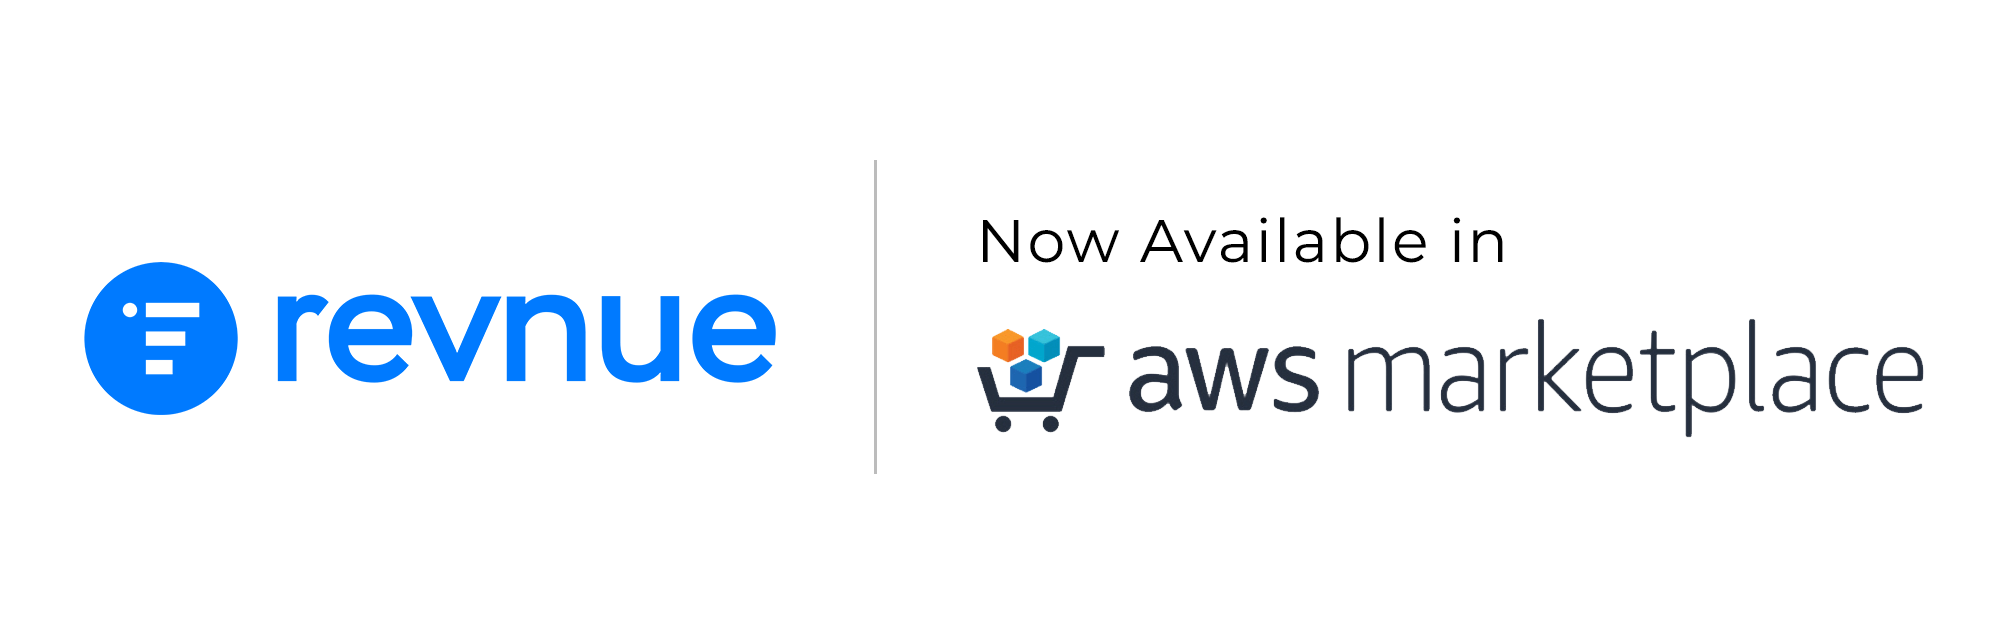 Revnue™ Industry Disruptive AI/ML-Based Asset and Contract Lifecycle Platform Now Available in AWS Marketplace